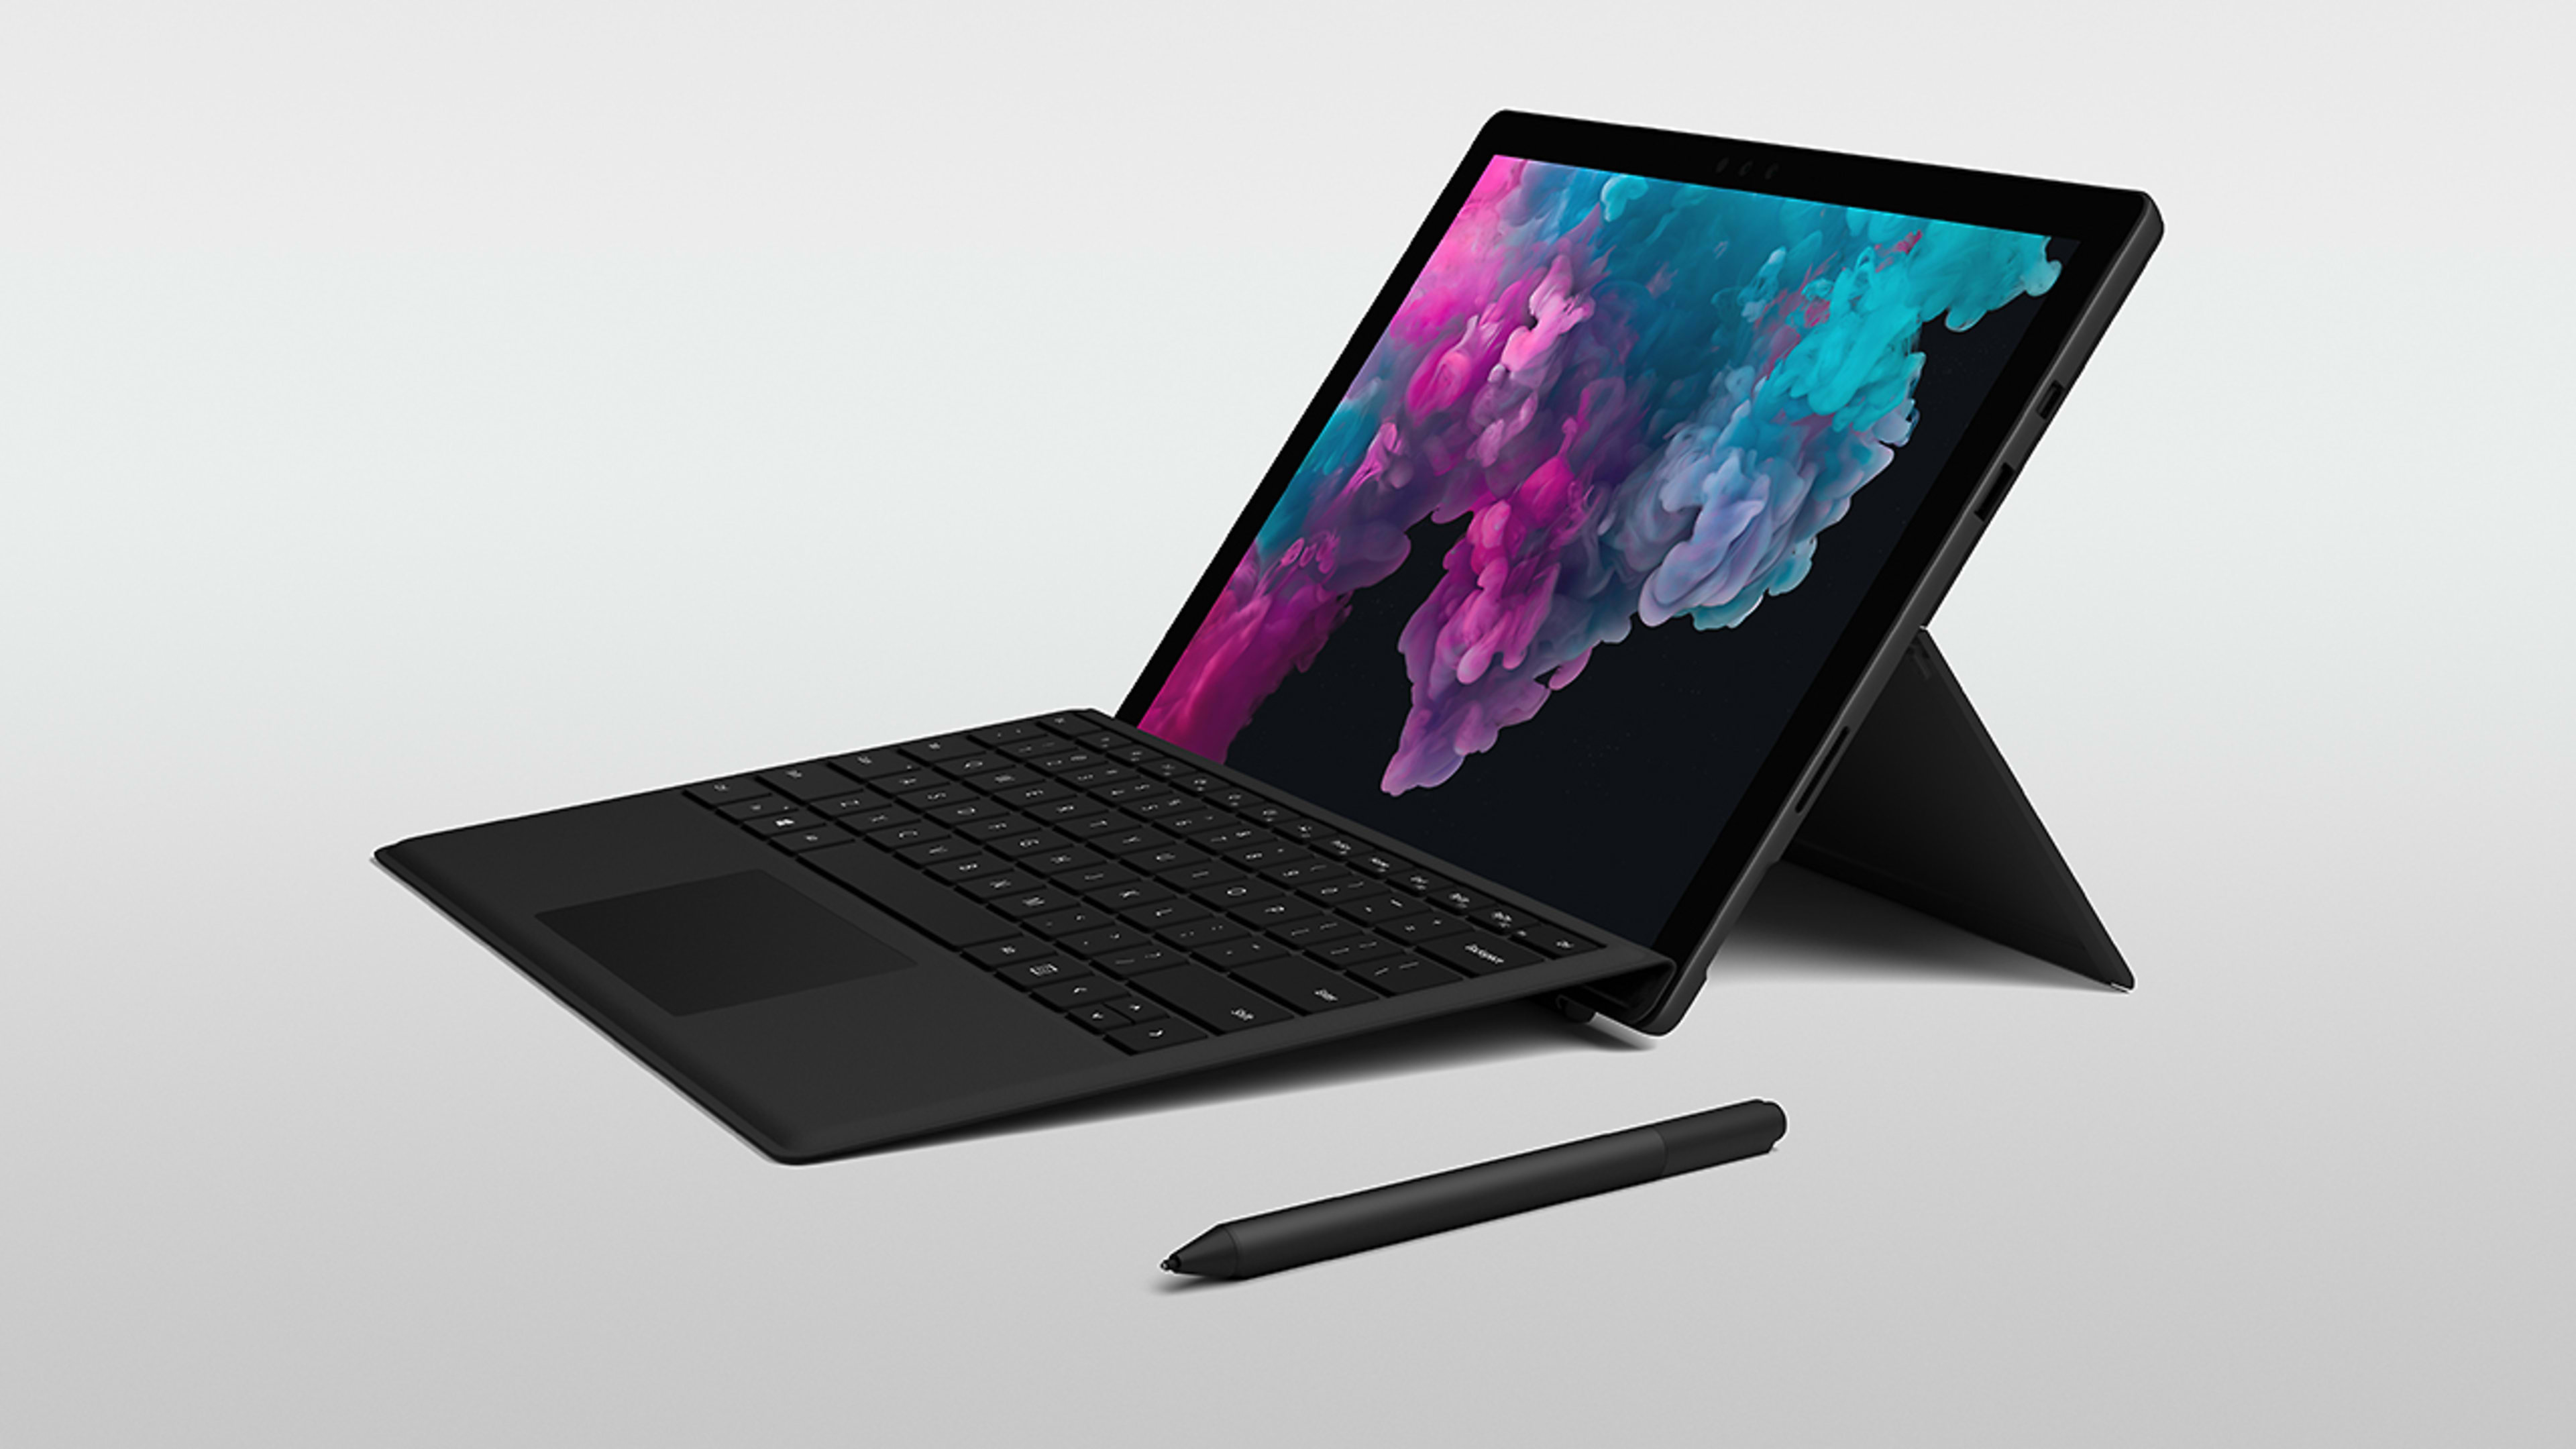 As laptop replacements, the iPad Pro and Surface Pro are worlds apart